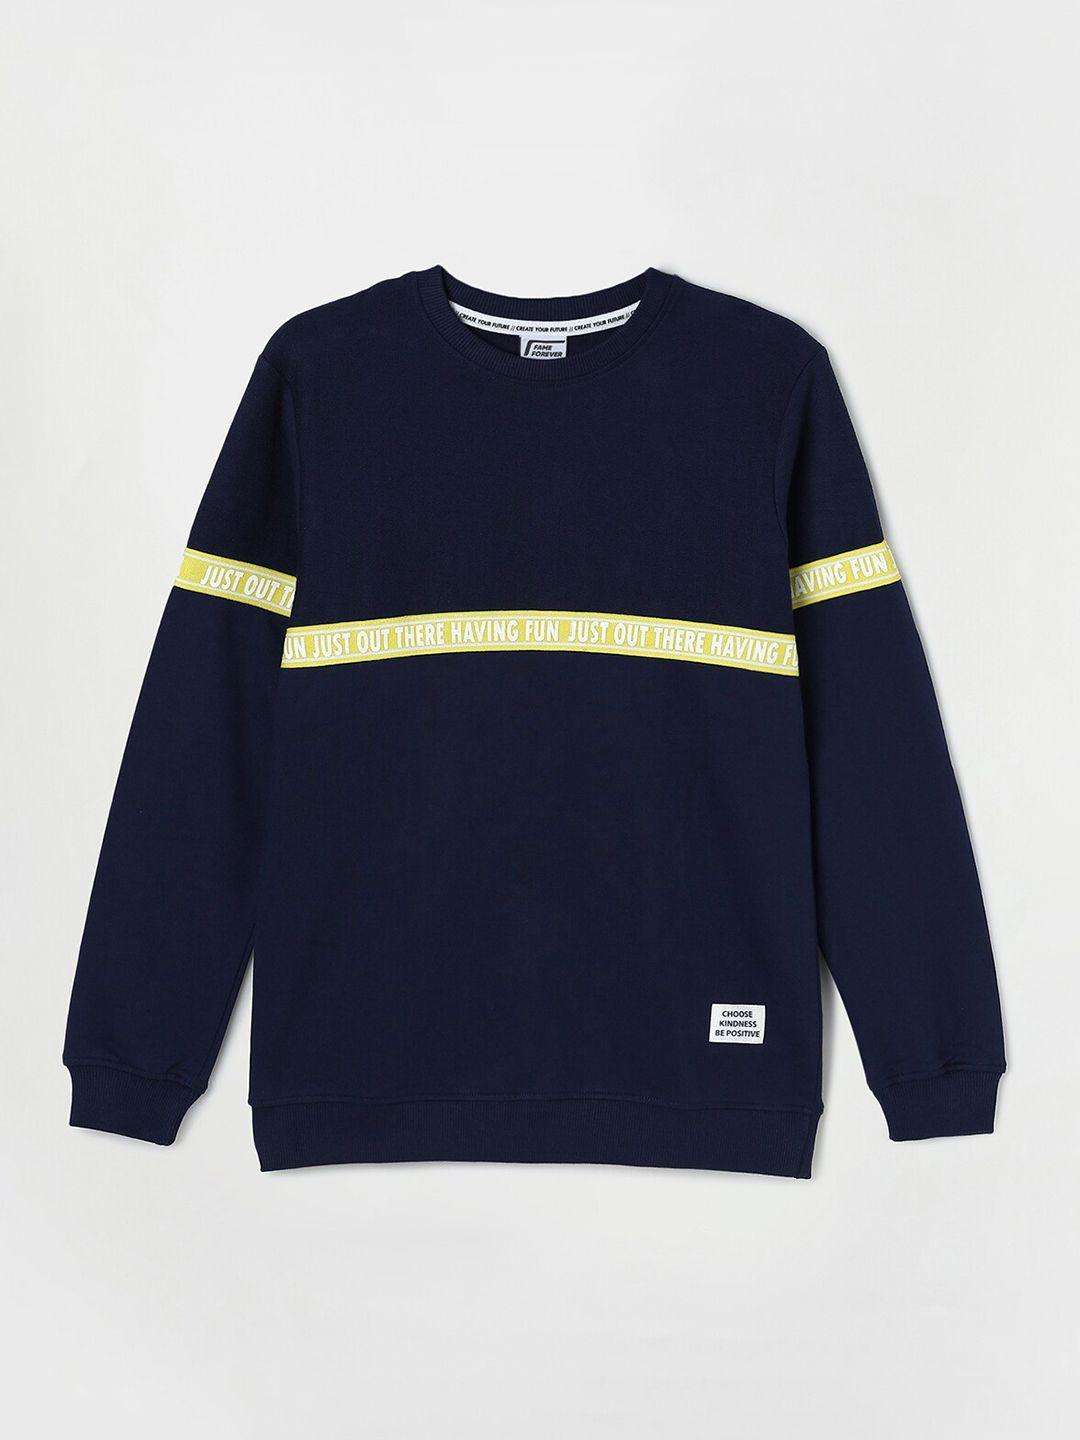 fame-forever-by-lifestyle-boys-navy-blue-cotton-striped-sweatshirt